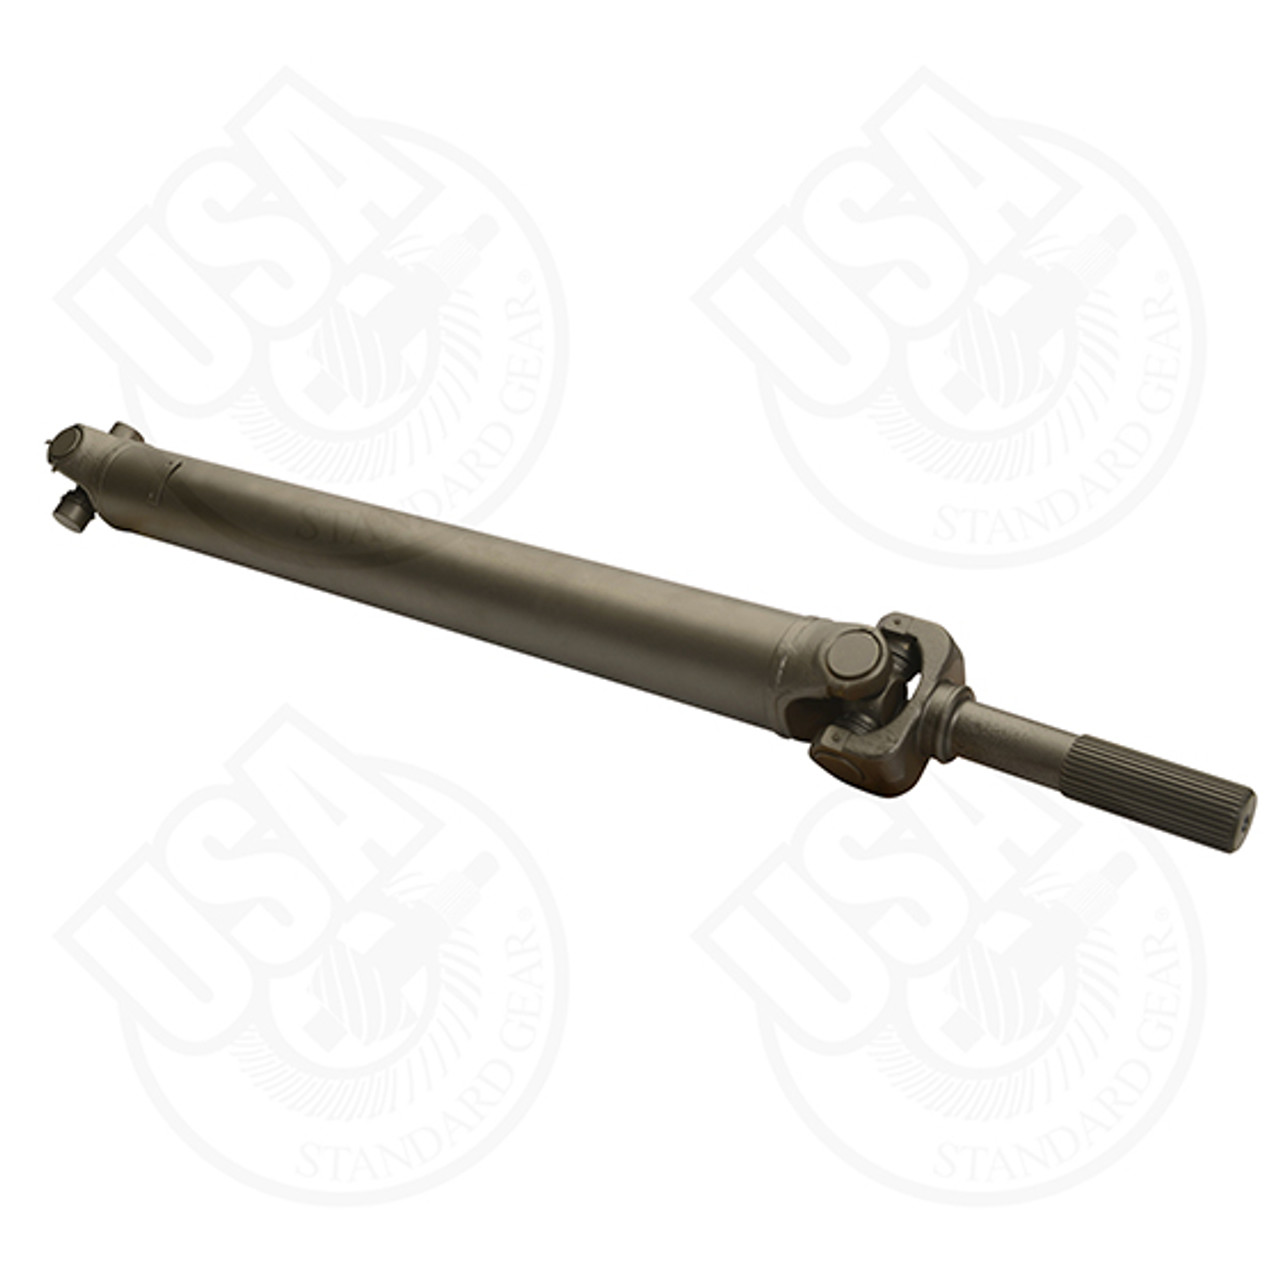 NEW USA Standard Front Driveshaft for GM Truck & SUV, 25" Weld to Weld